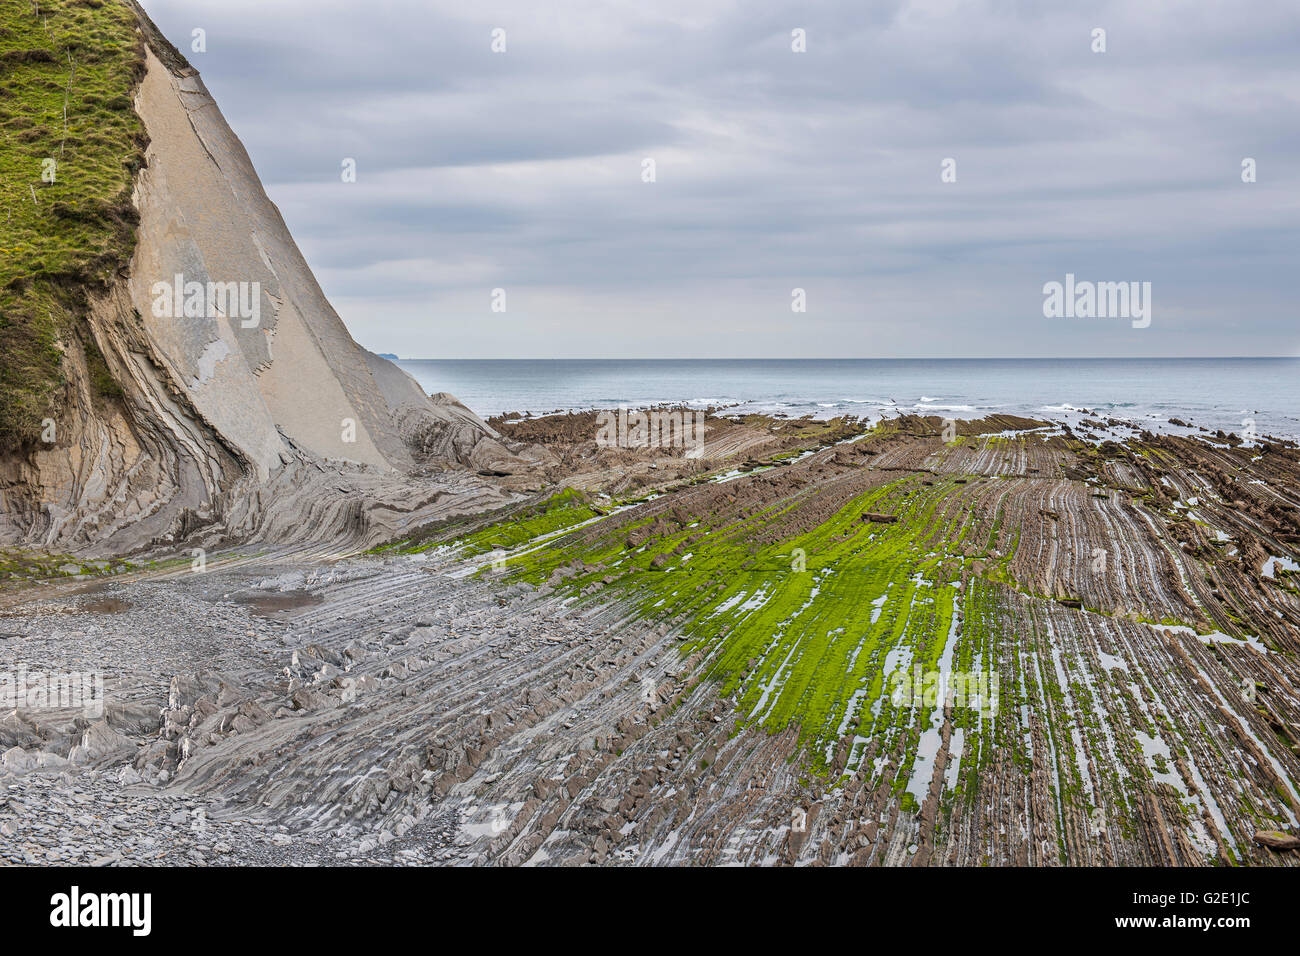 Flysch, different layers of rock, Cantabrian coast, Deba, Basque Country, Spain Stock Photo